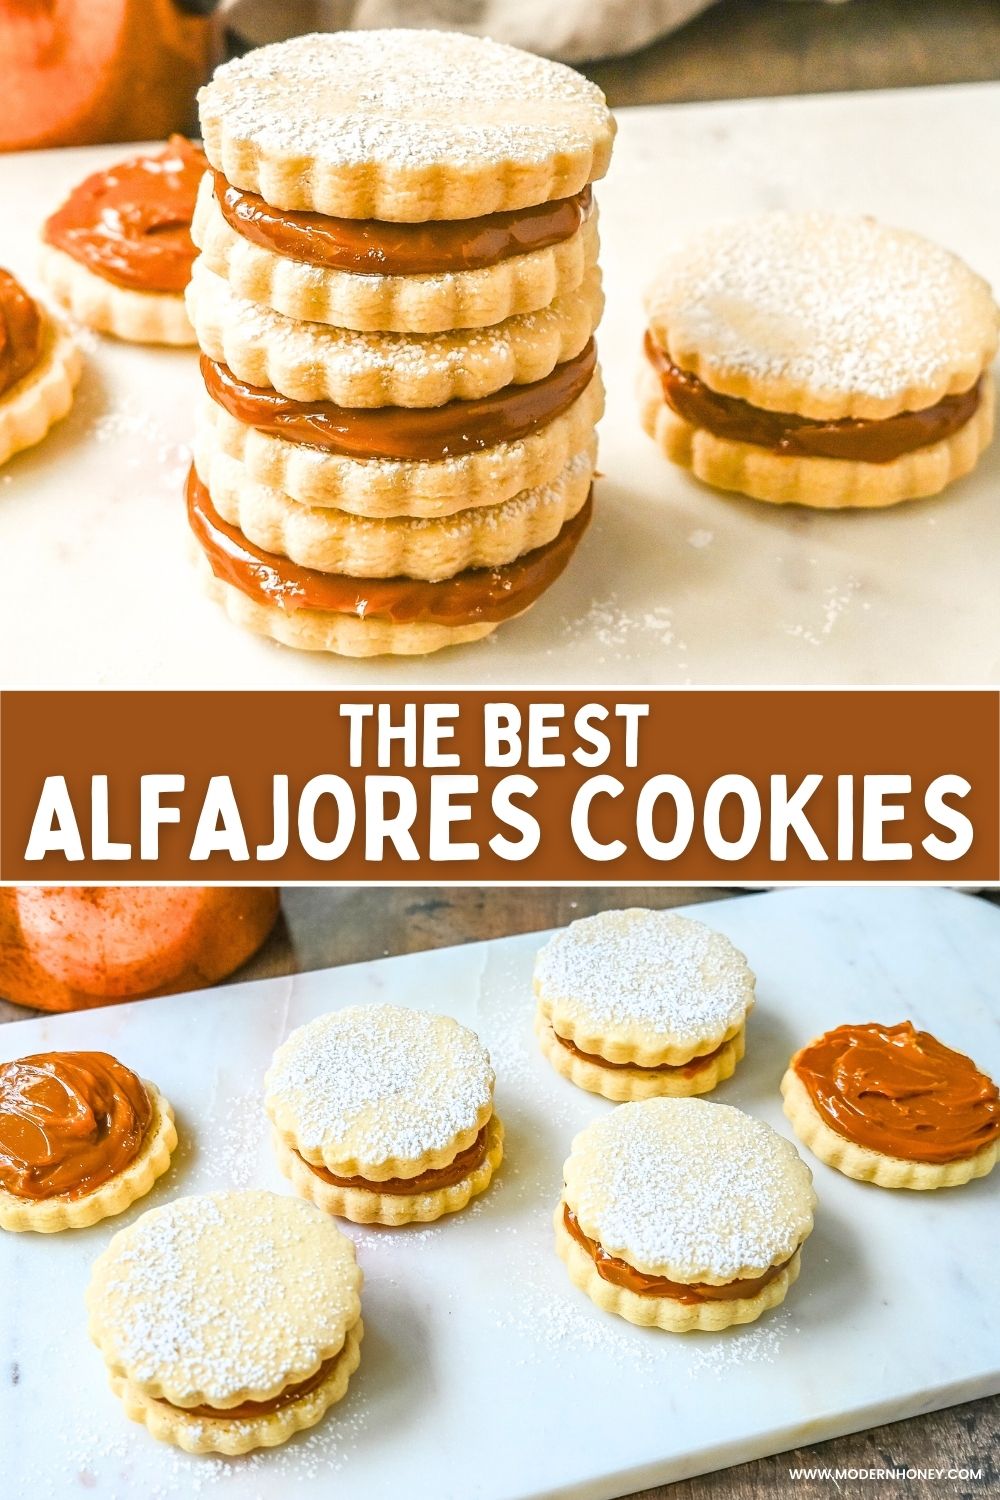 Alfajores Dulce de Leche Sandwich Cookies. These alfajores are a popular sandwich cookie around the world are made with two soft and buttery shortbread cookies filled with rich dulce de leche filling. A festive Christmas Cookie Recipe.